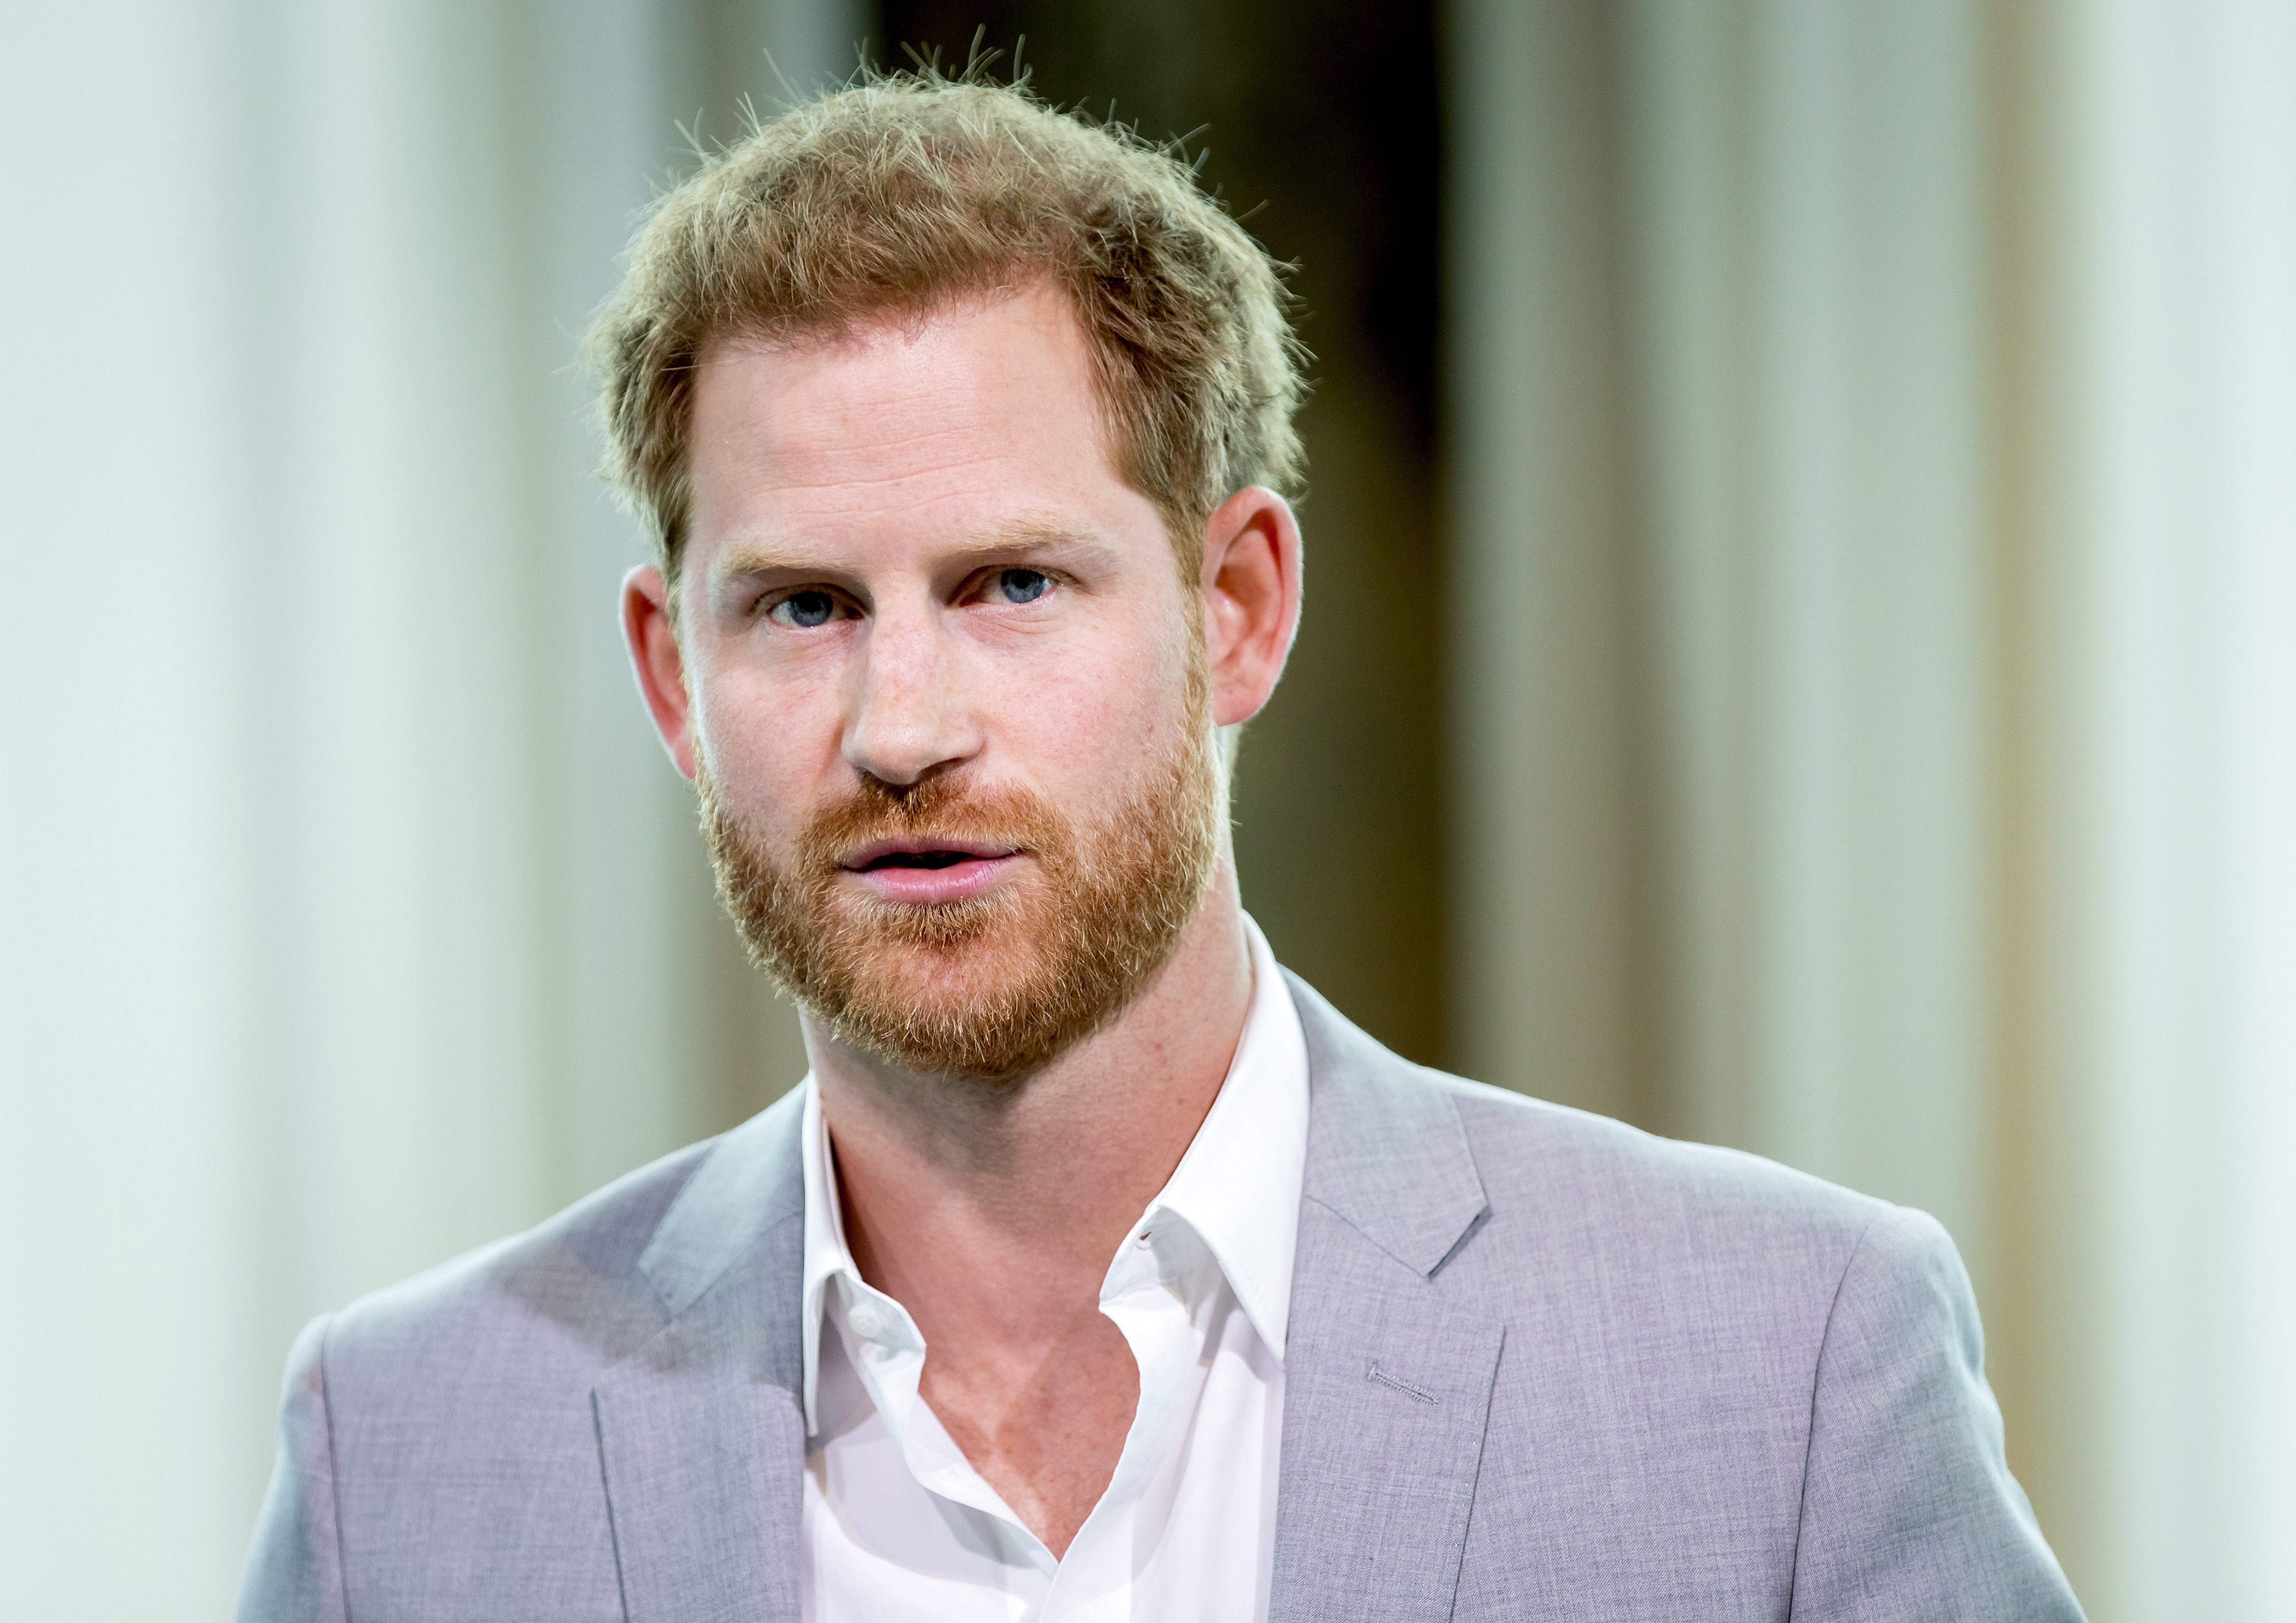 Prince Harry attended the Adam Tower project introduction and global partnerships by Booking.com, SkyScanner, CTrip, TripAdvisor and Visa in Amsterdam in 2019.